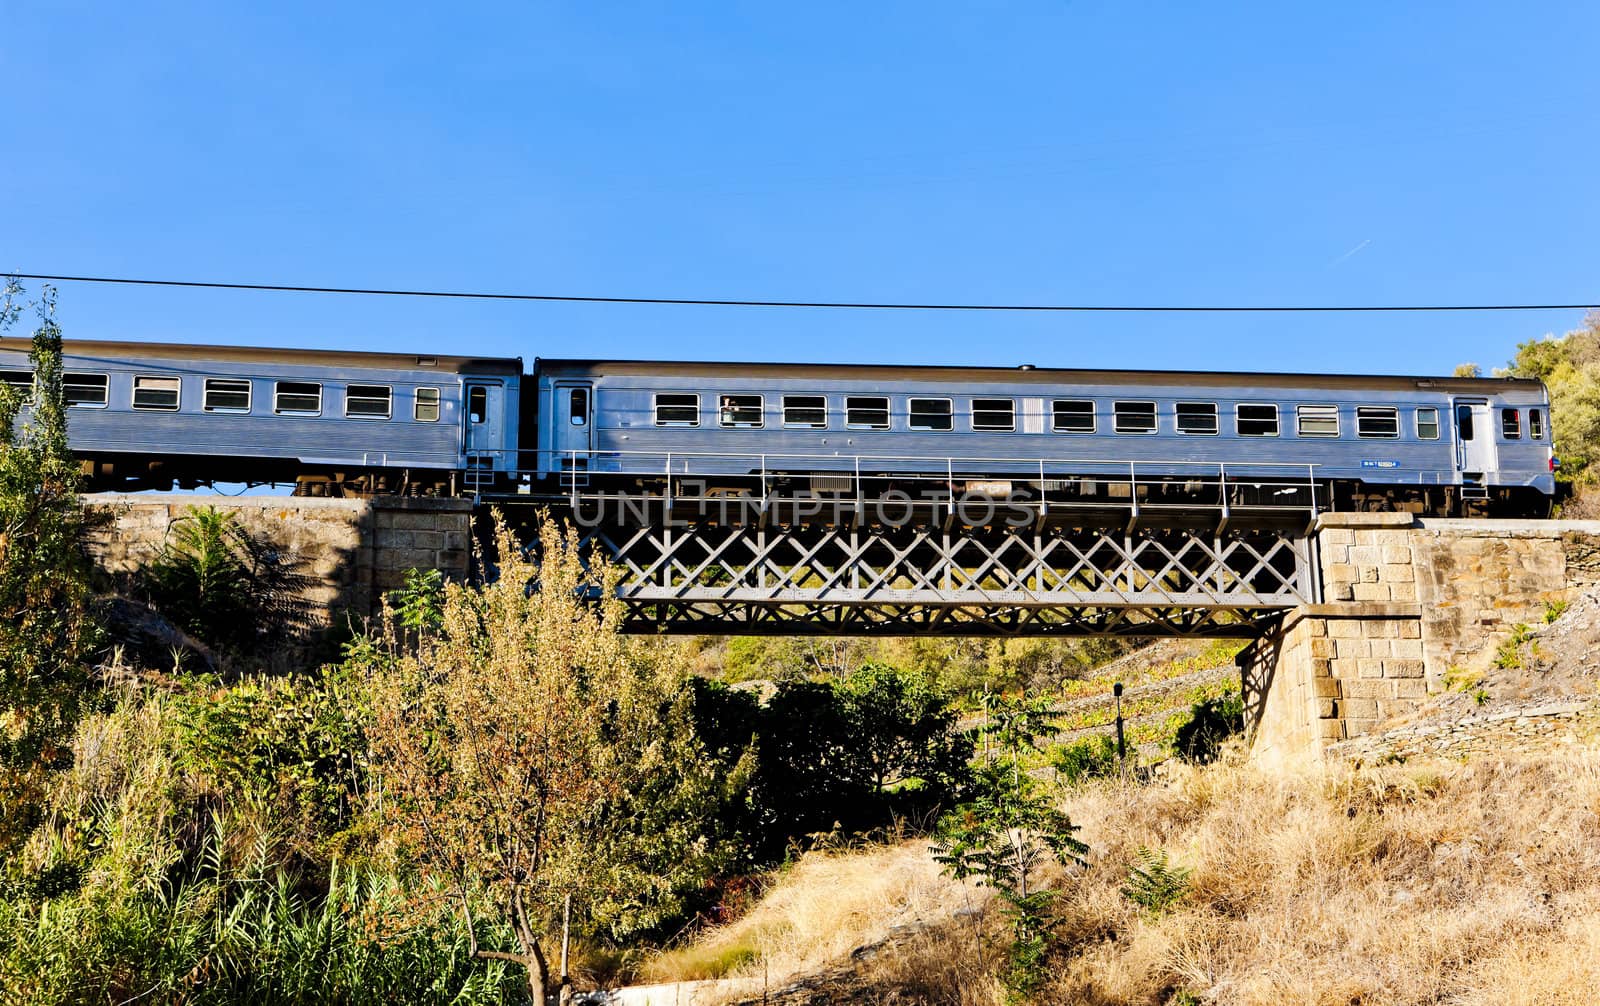 train on railway viaduct in Douro Valley, Portugal